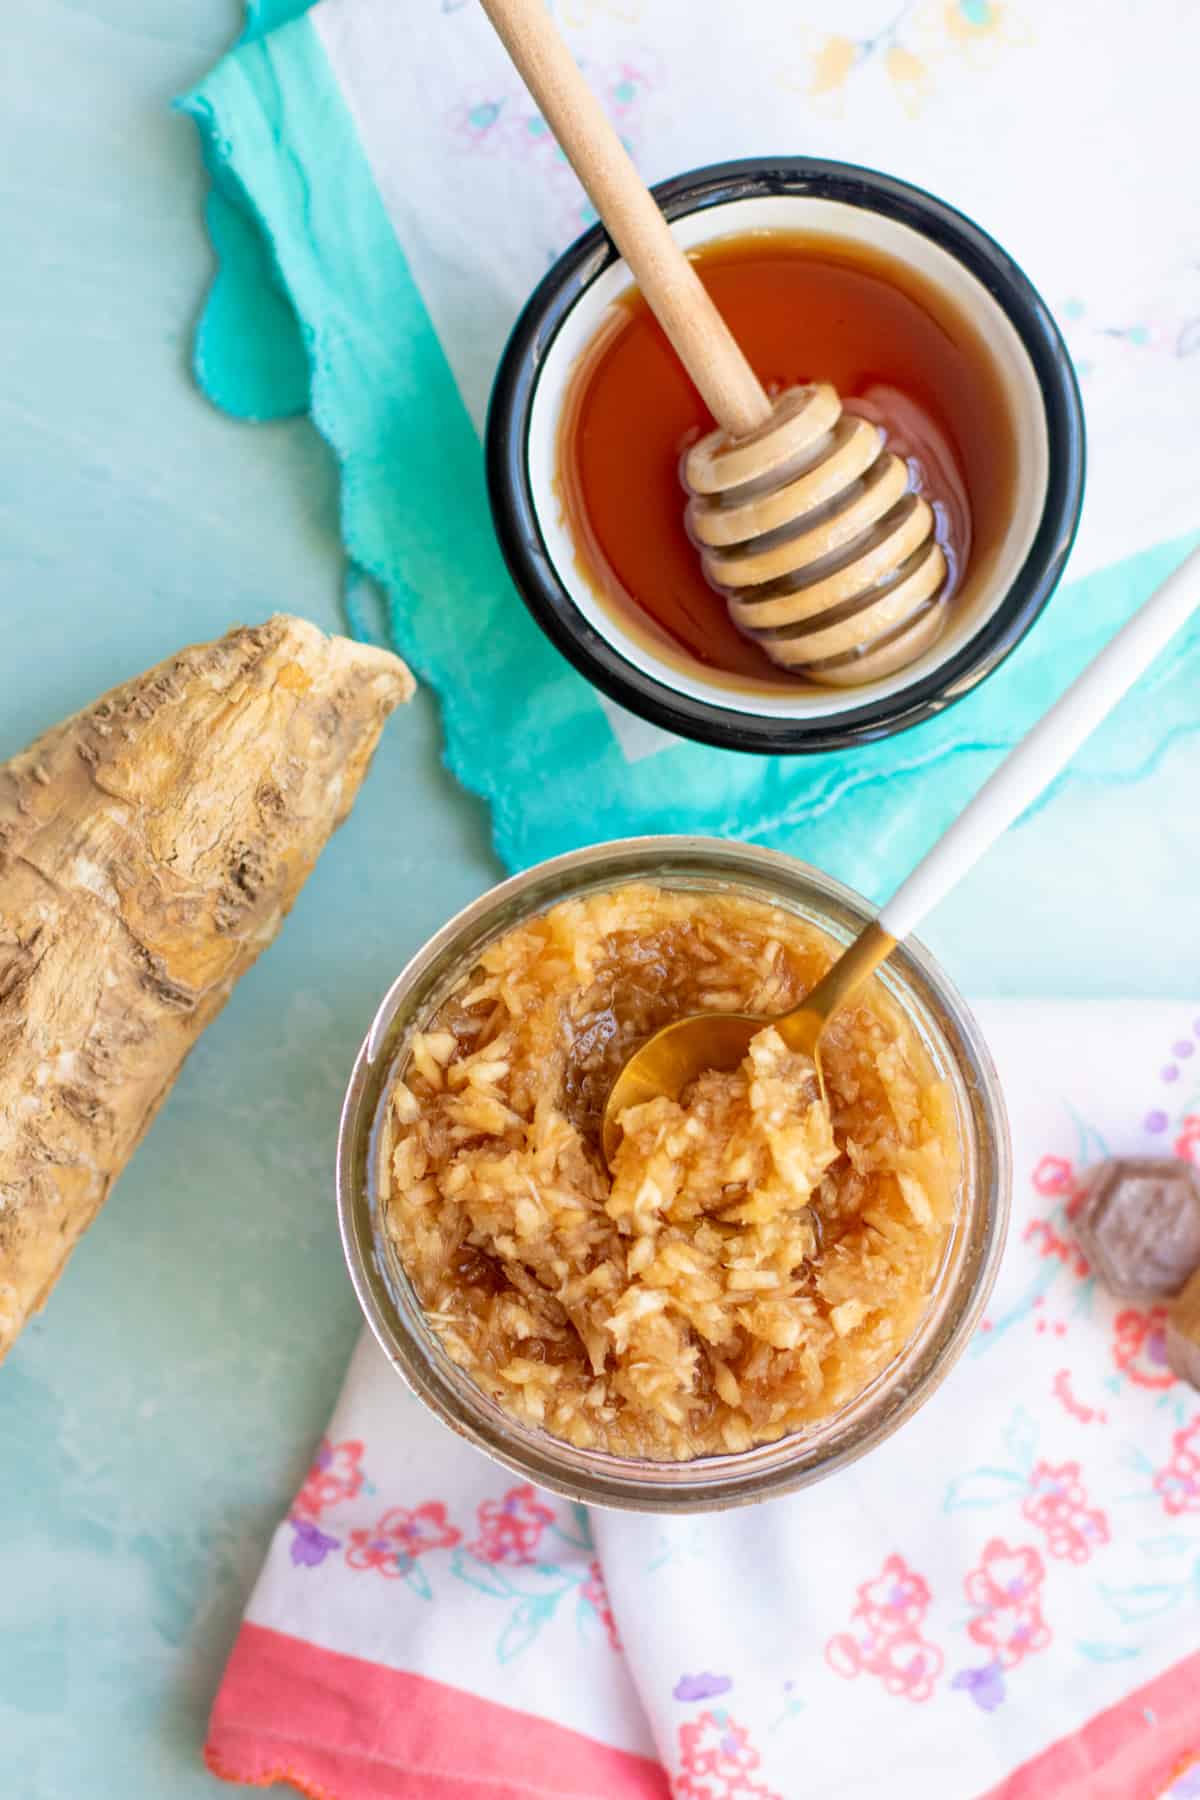 Overhead view of a jar of a natural sinus relief home remedy, next to a whole horseradish root and a small bowl of honey. A spoon dips into the sinus kicker.